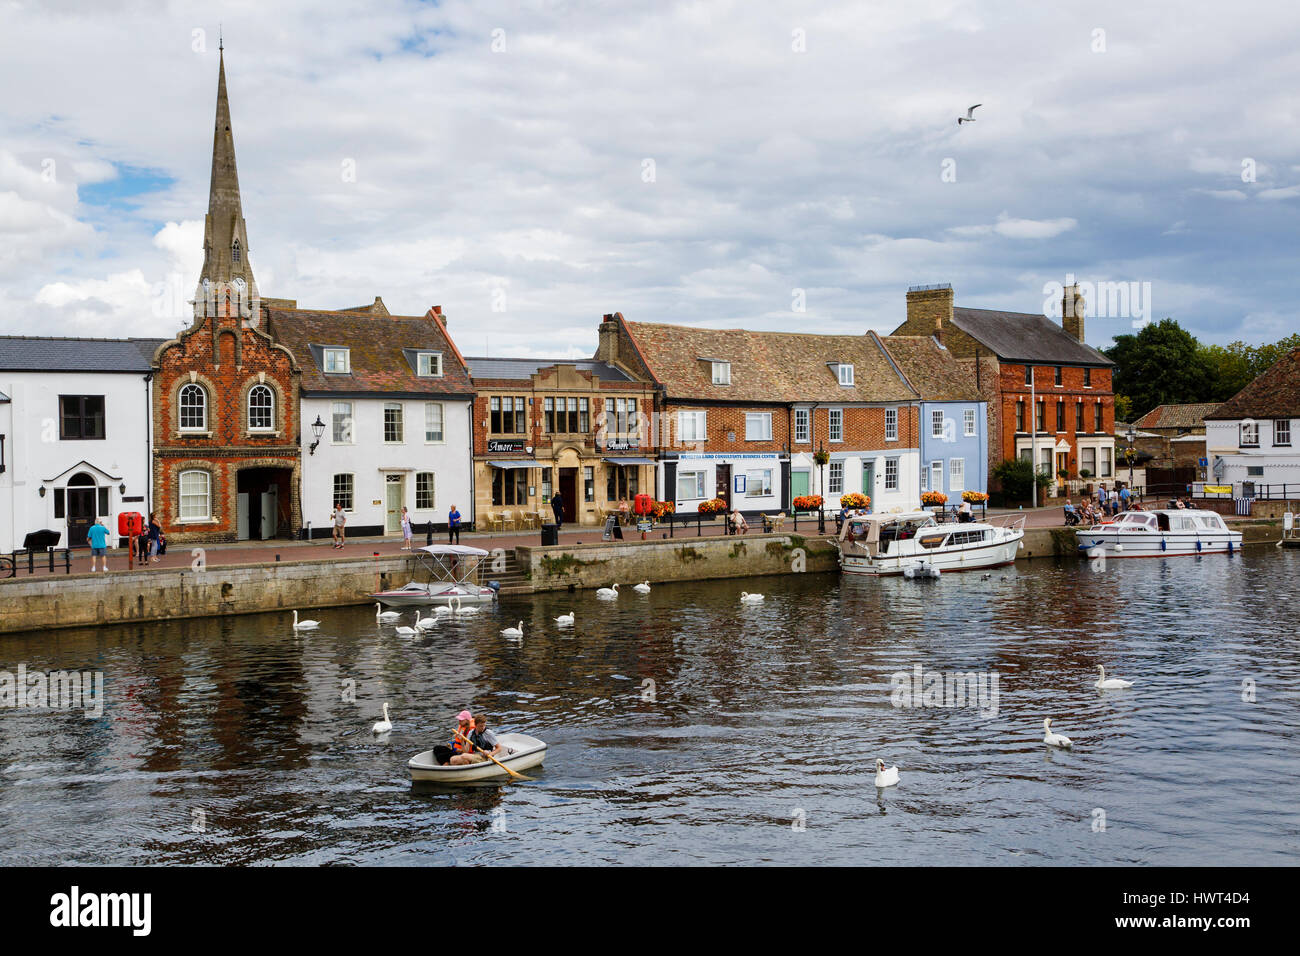 The Quay and River Great Ouse, St Ives, Cambridgeshire, England Stock Photo